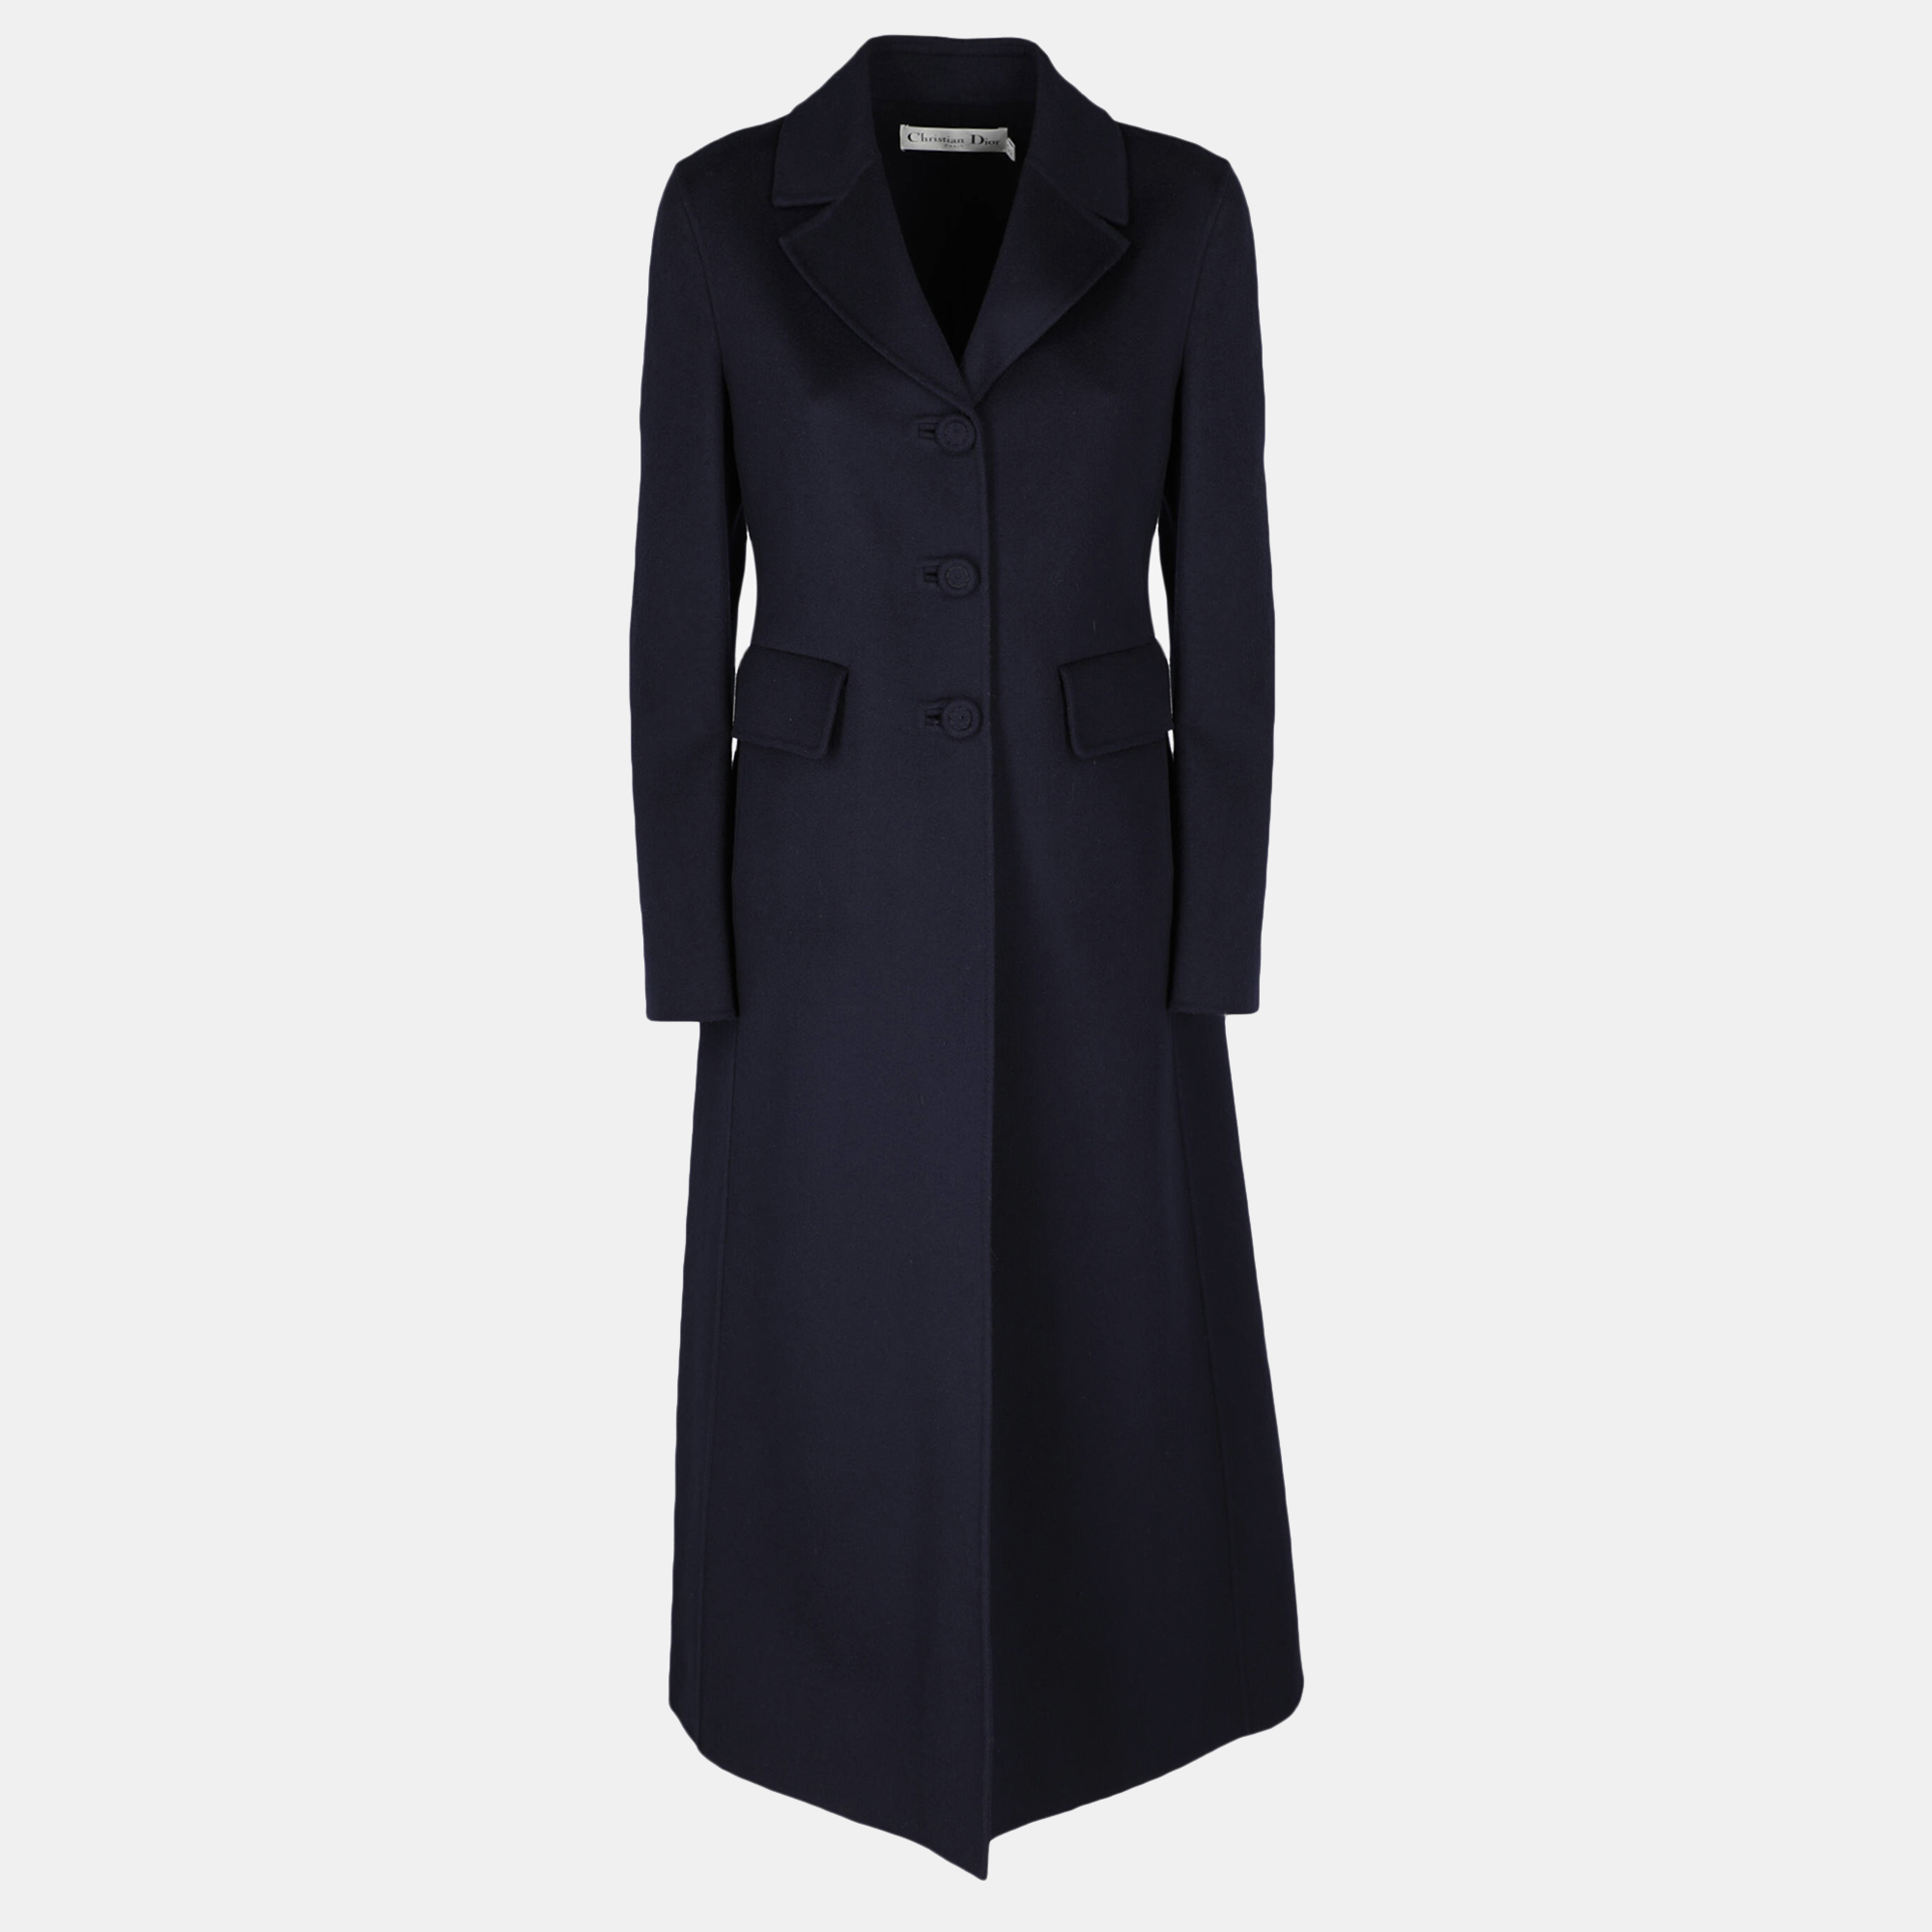 Dior  Women's Wool Single Breasted Coat - Navy - M